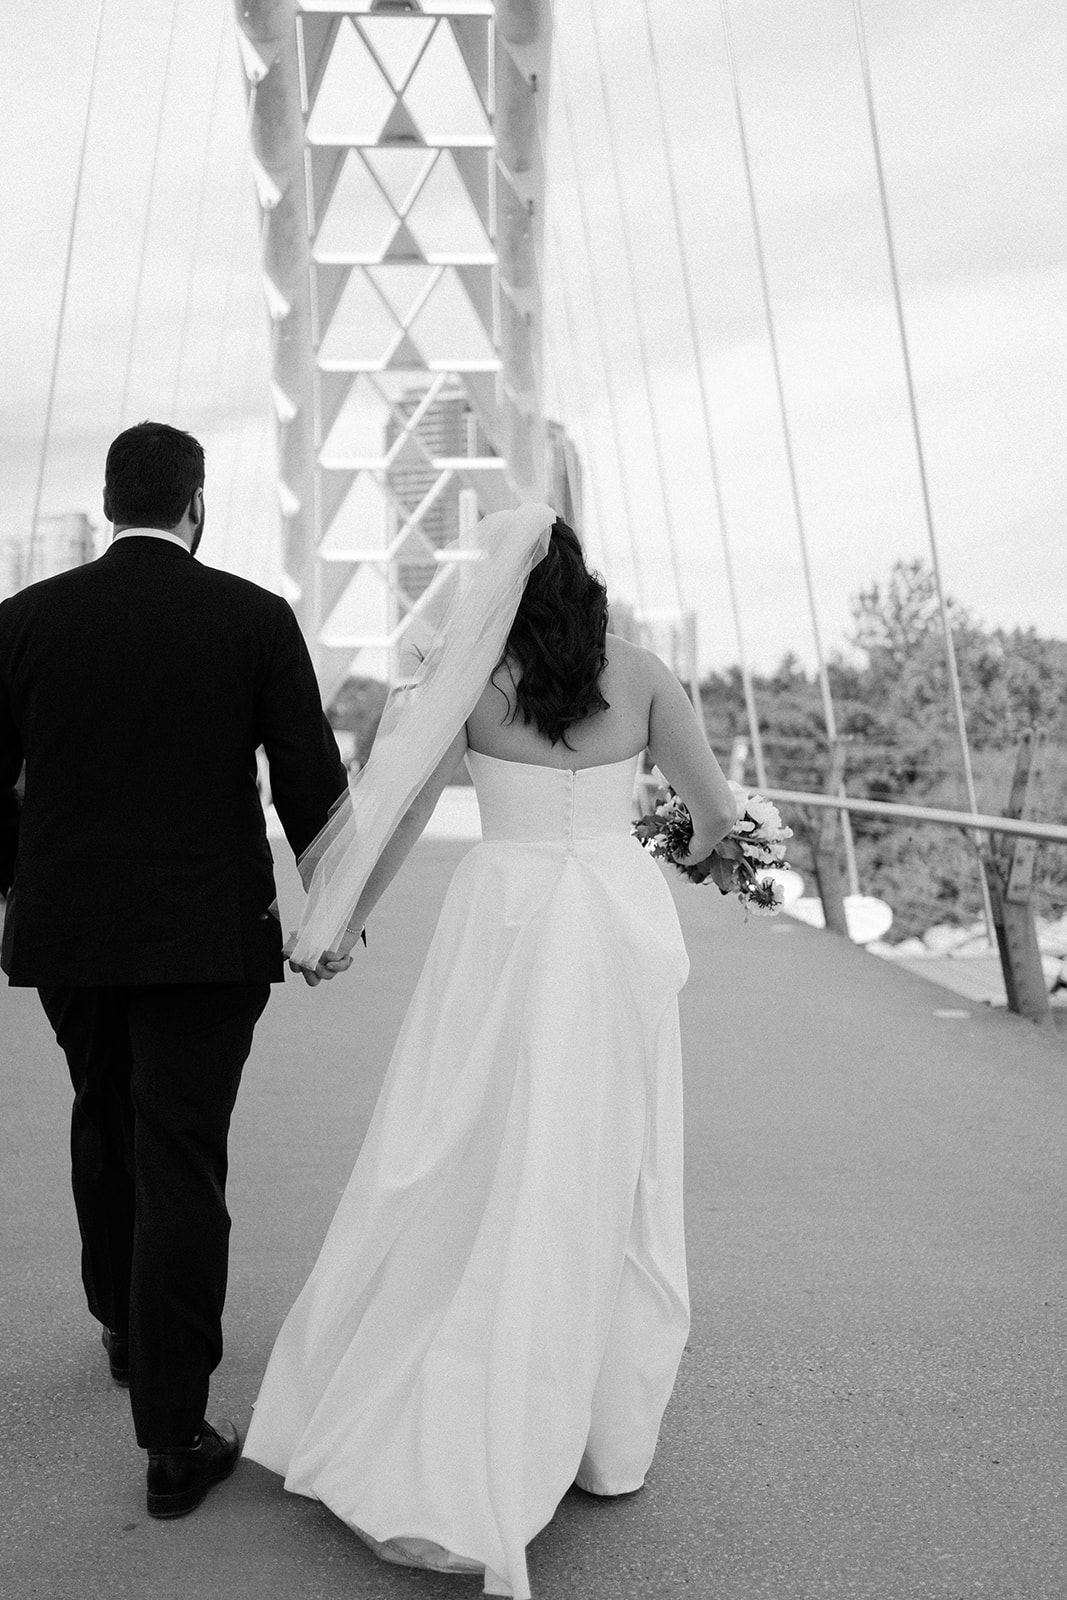 Black and white image of a married couple holding hands walking on a bridge.